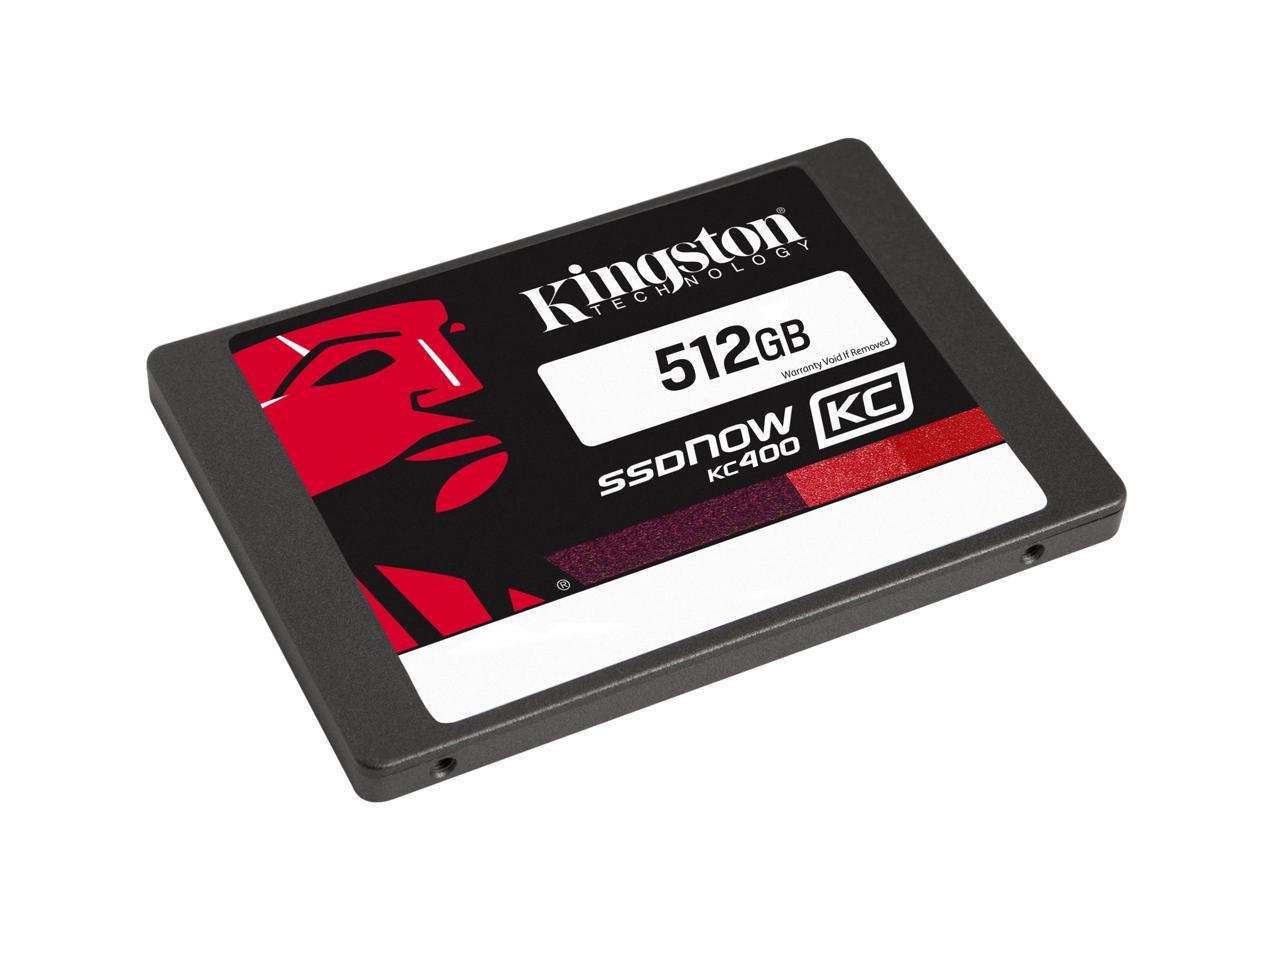 Kingston Skc400S37A/512G 2.5" 512Gb Sata Iii Business Solid State Disk